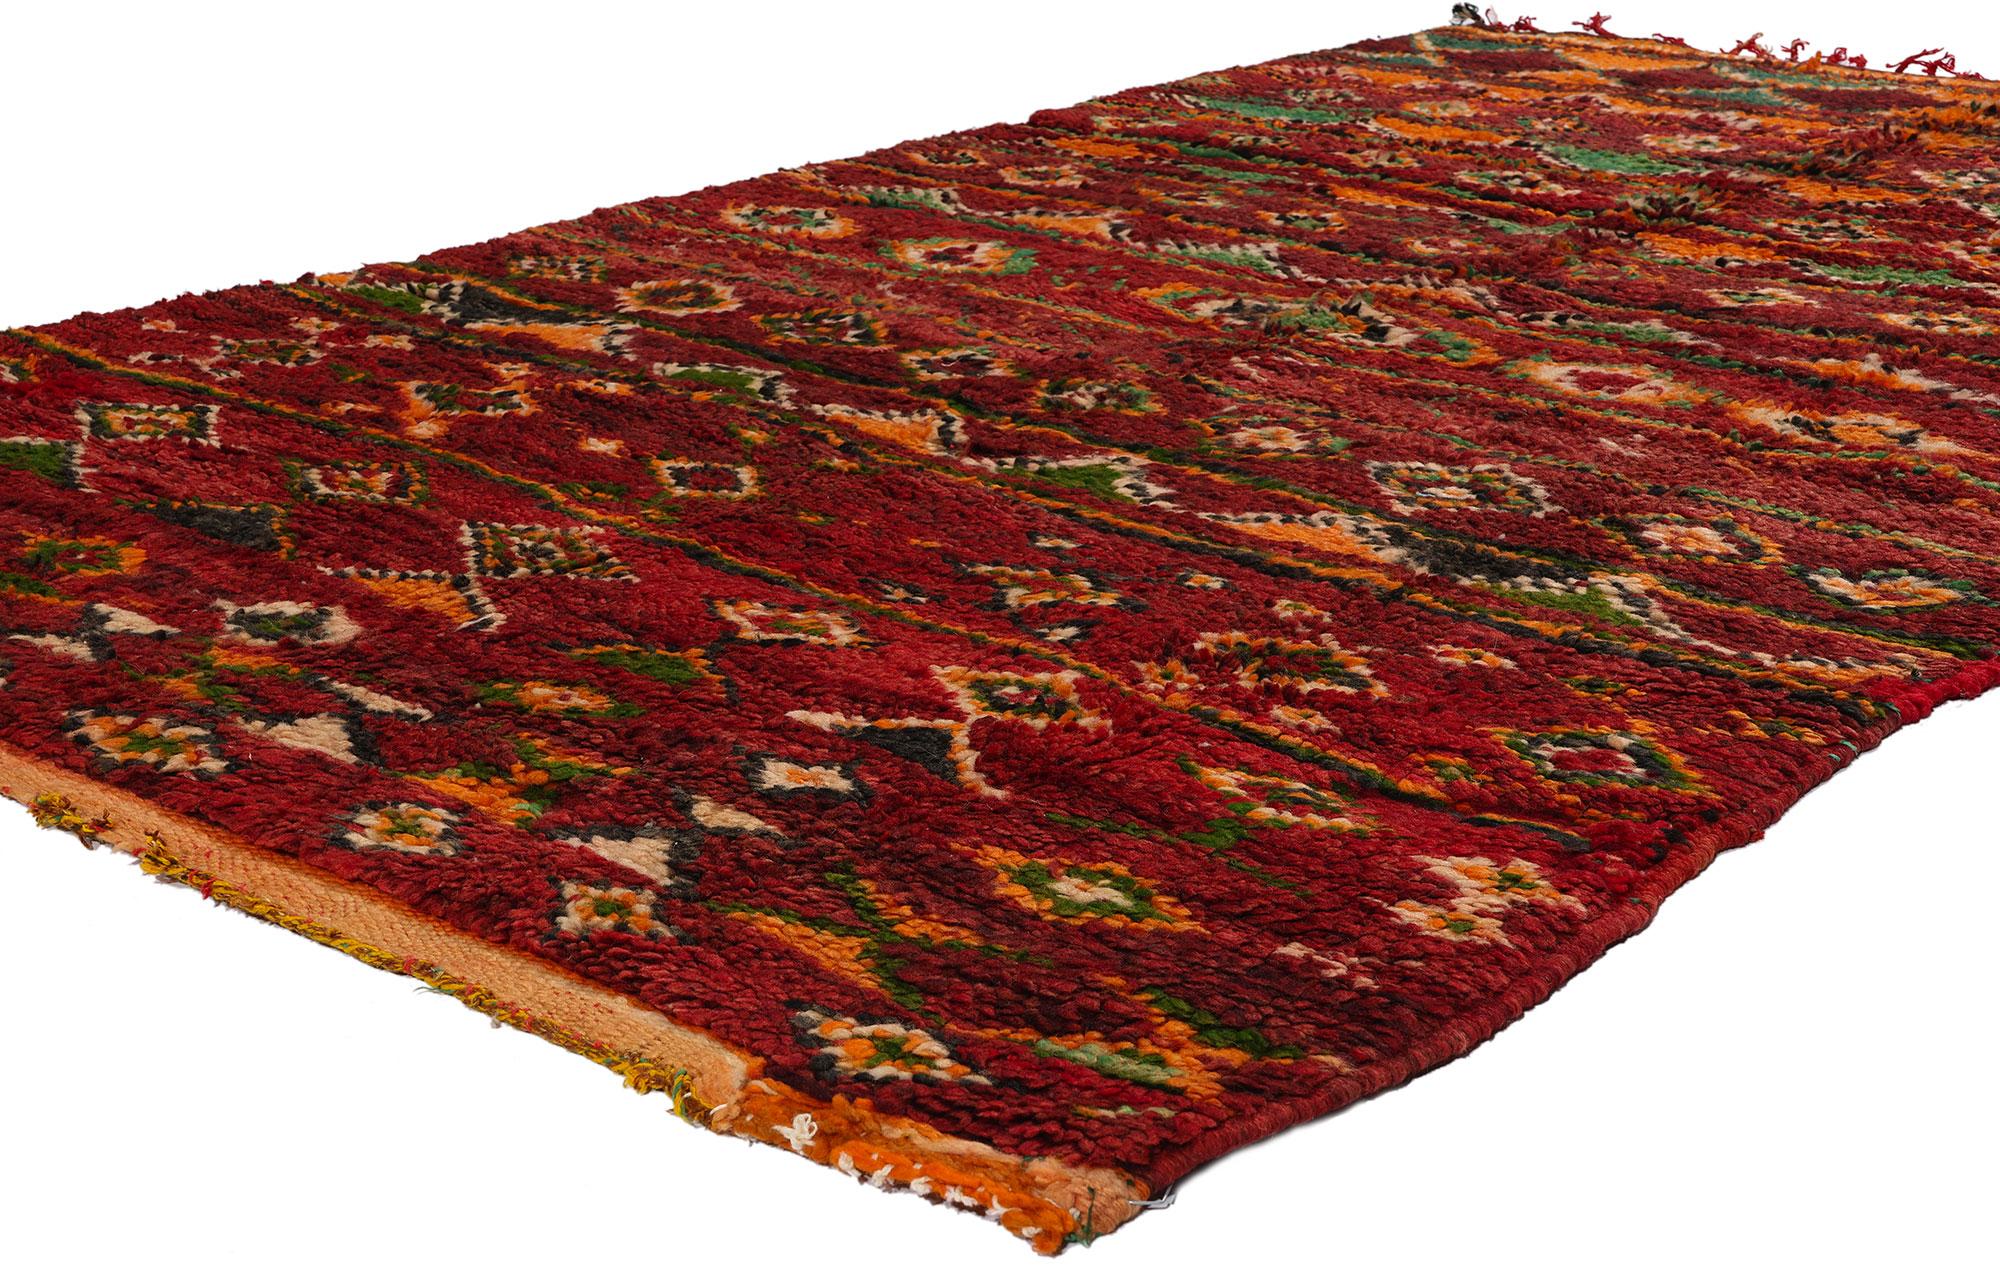 21754 Vintage Earth-Tone Boujad Moroccan Rug 04'09 x 07'07. Embark on a journey into the timeless allure of Southwest style with this hand knotted wool vintage Moroccan rug hailing from the lively city of Boujad within the Khouribga region. Infused